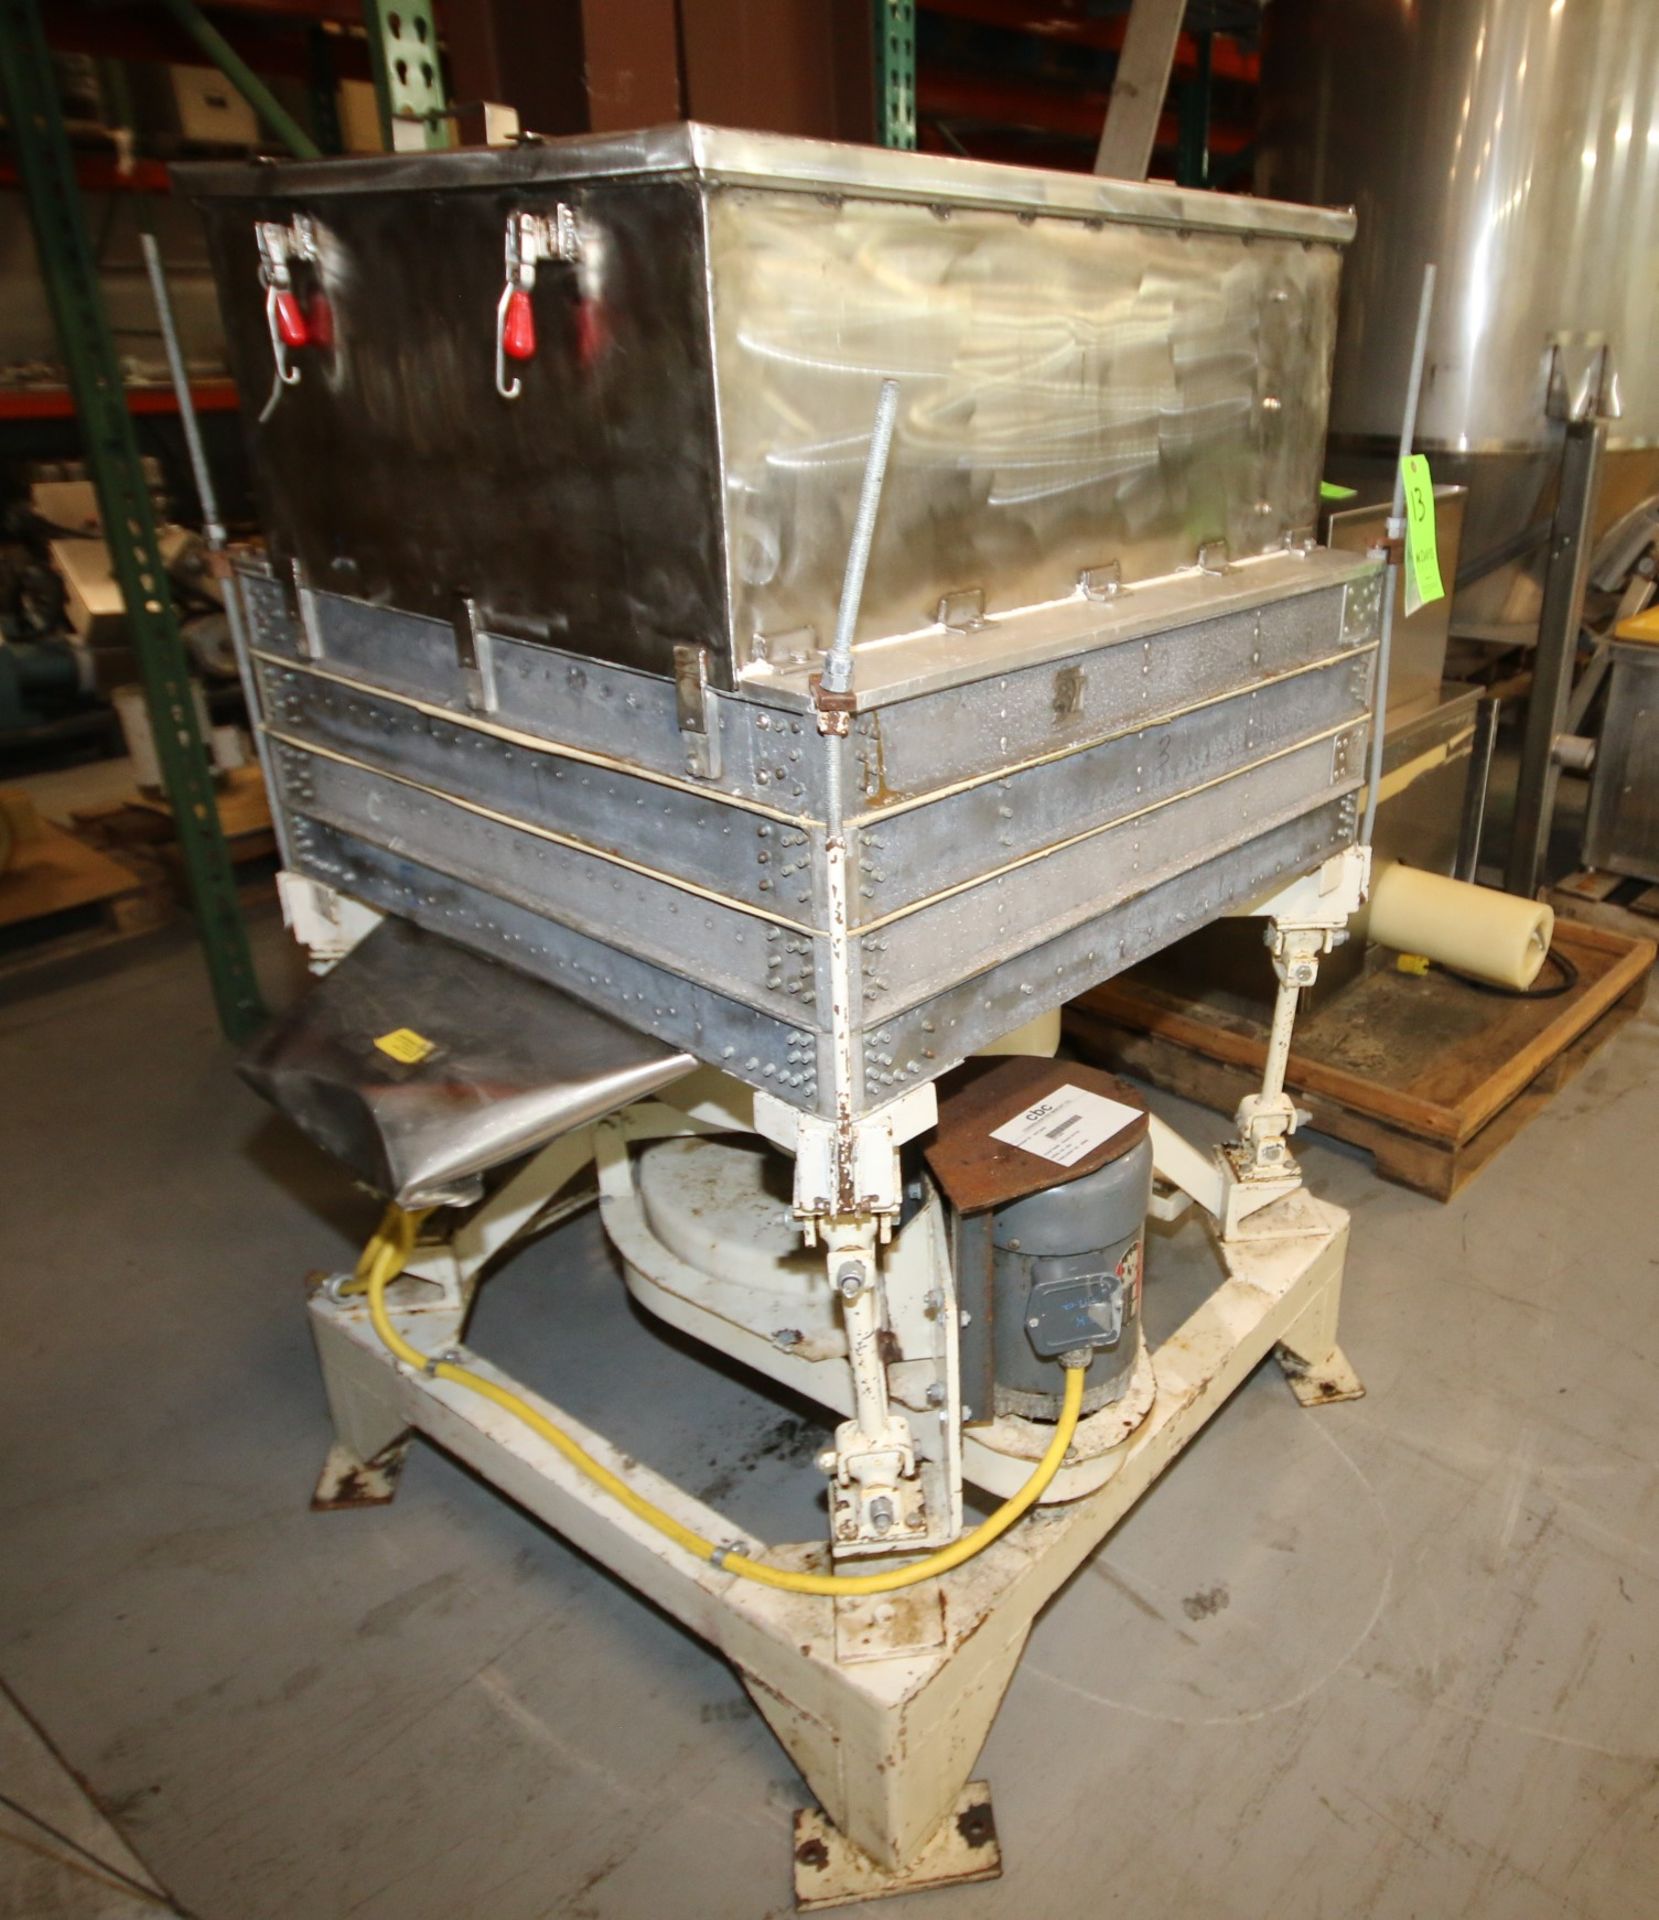 Ferrell - Ross 36" x 28" Gyratory Screen / Retangular Sifter, Size CS1, SN 4830, with 2 Section - Image 3 of 6